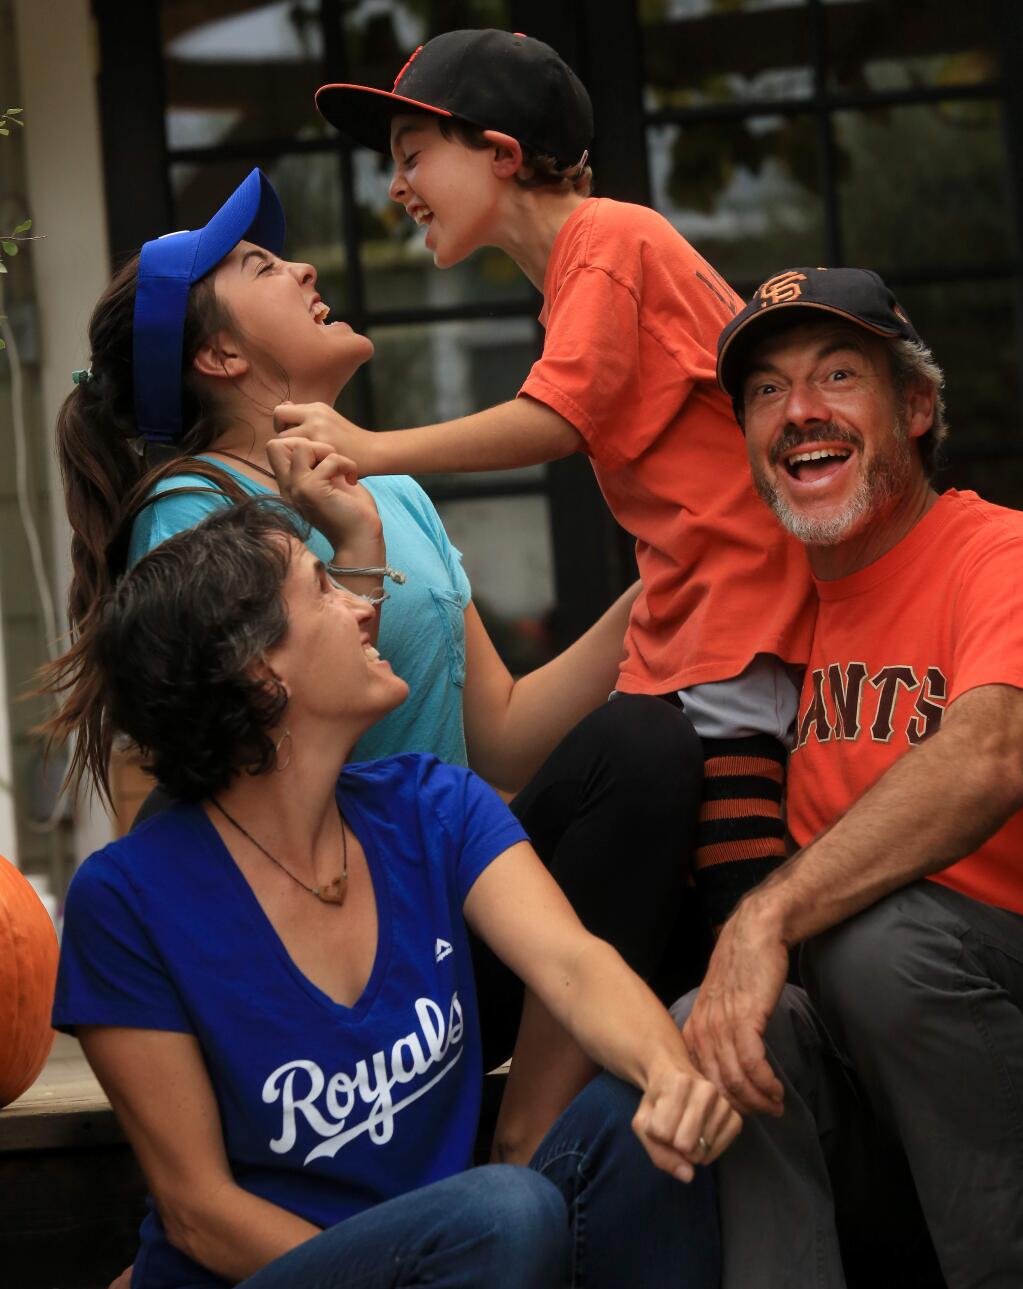 Royals vs Giants…Tina Howa and her husband Adam Goldberg like two different teams, she the Royals and he the Giants. They've passed along the genes to their children Bella Goldberg, left and Eli Goldberg, right, Thursday Oct. 23, 2014. (Kent Porter / Press Democrat) 2014